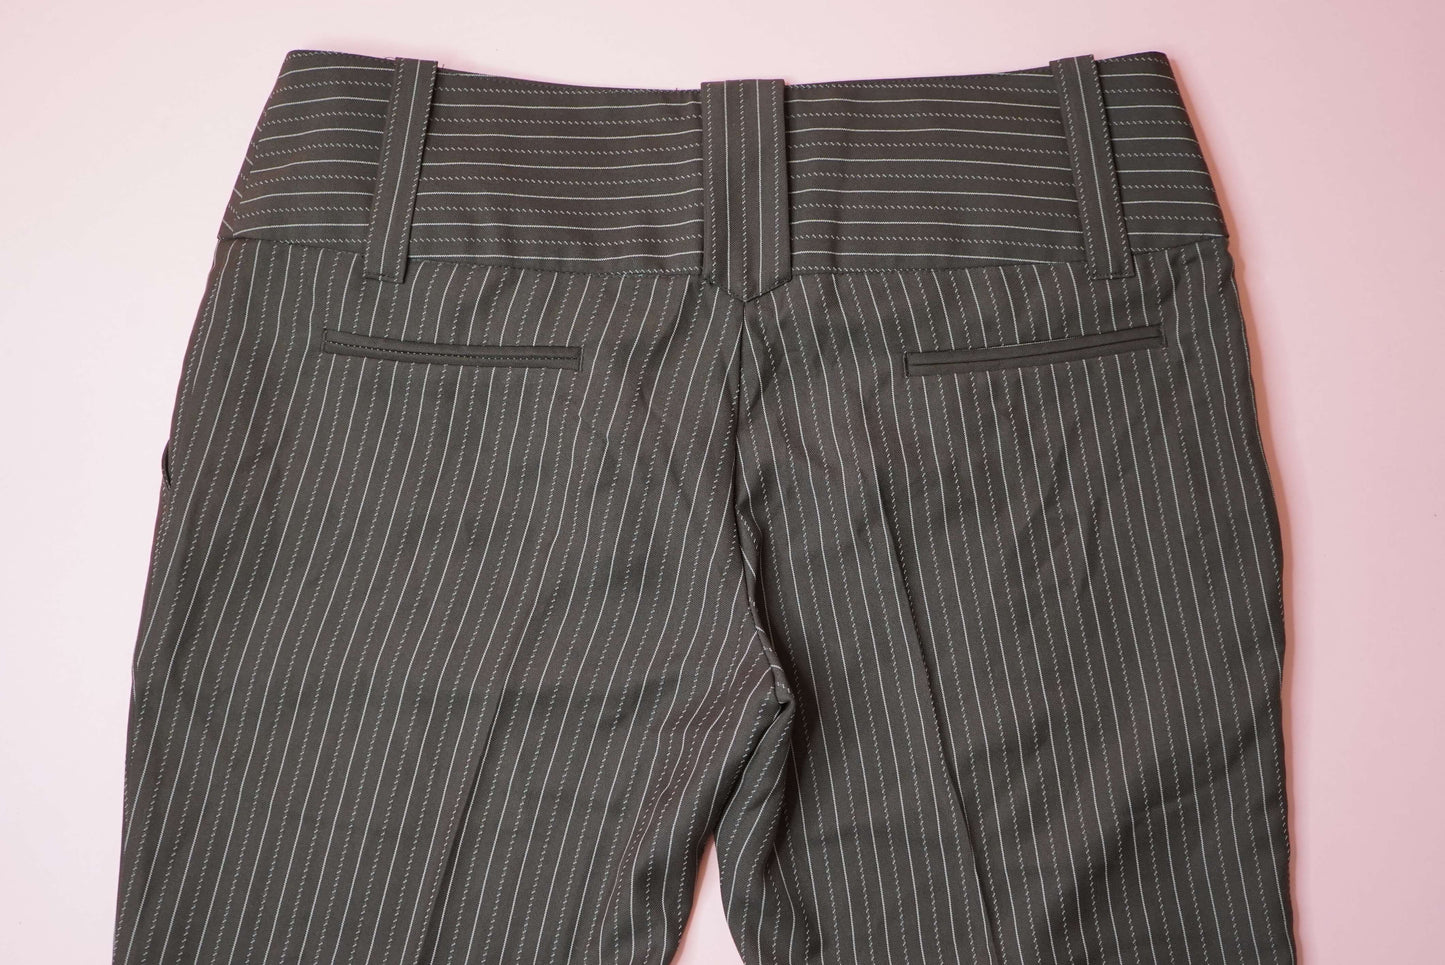 90s Y2K Low Rise Pinstripe Bootcut Trousers Dark Academia Suit Pants Wide Belt Waistband Detail W31-32